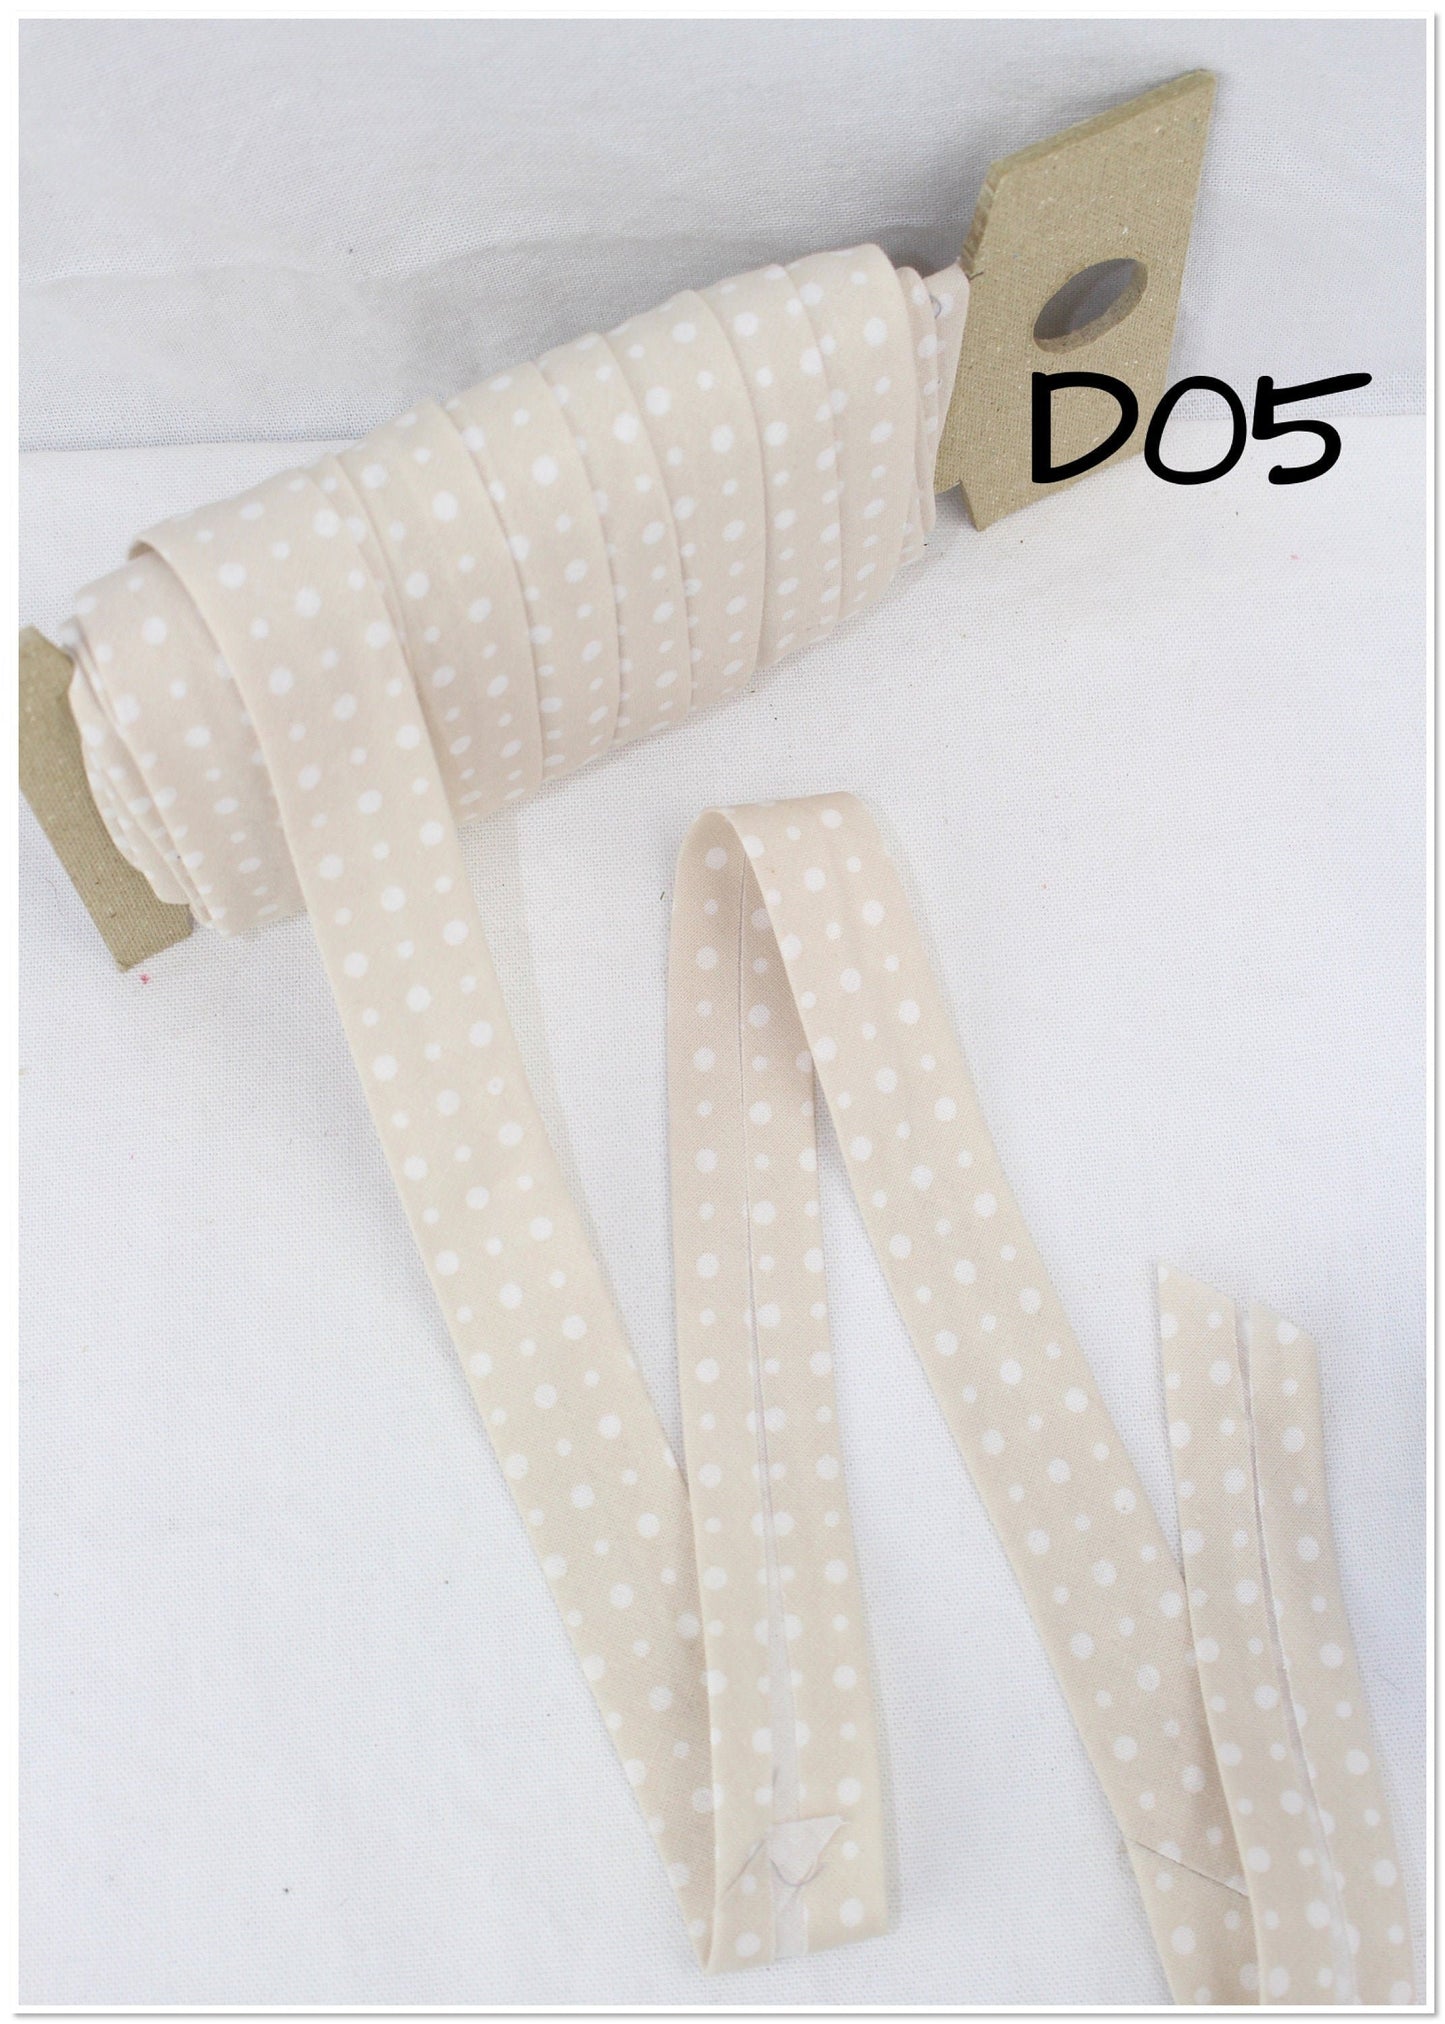 Bias Binding (Tape) 25mm, Cotton, Single Fold, white dots. Fusible iron on available.